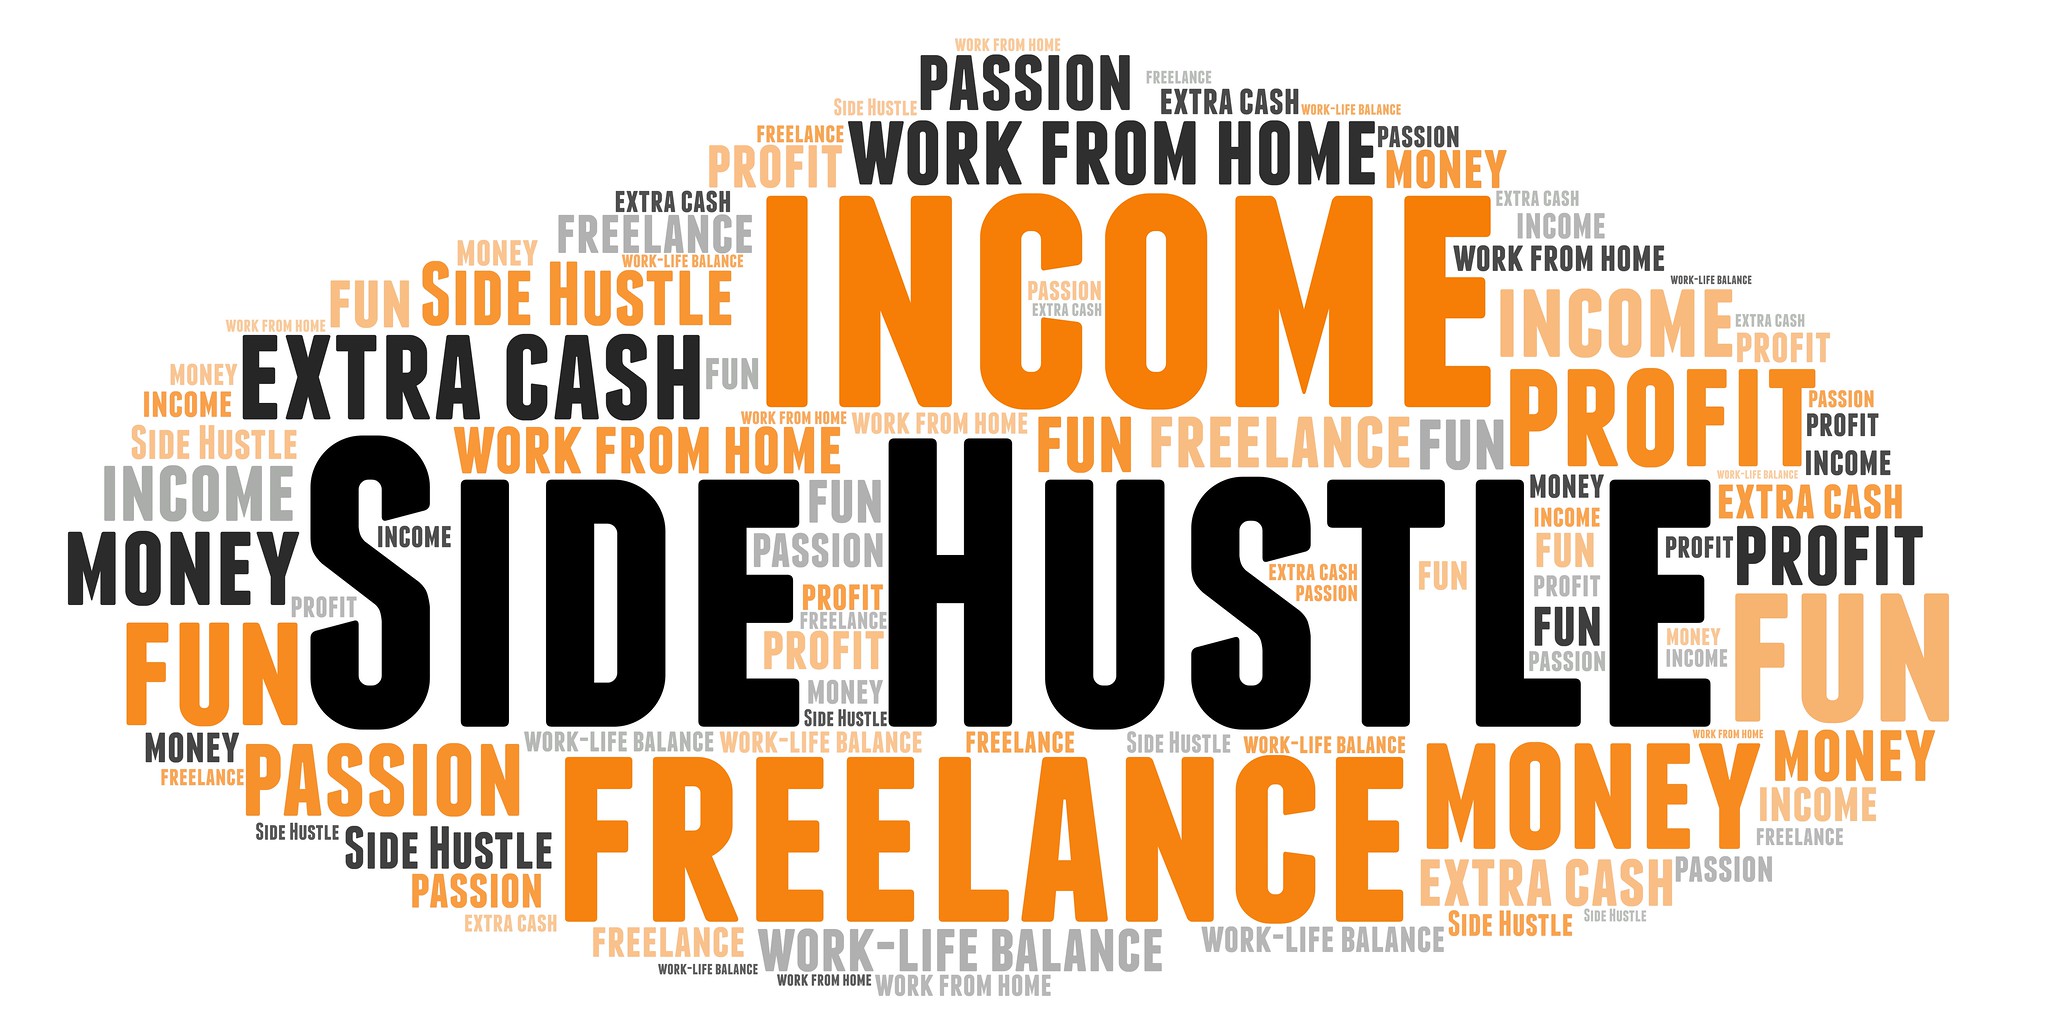 Marketing as a Side Hustle: An Agency’s Perspective